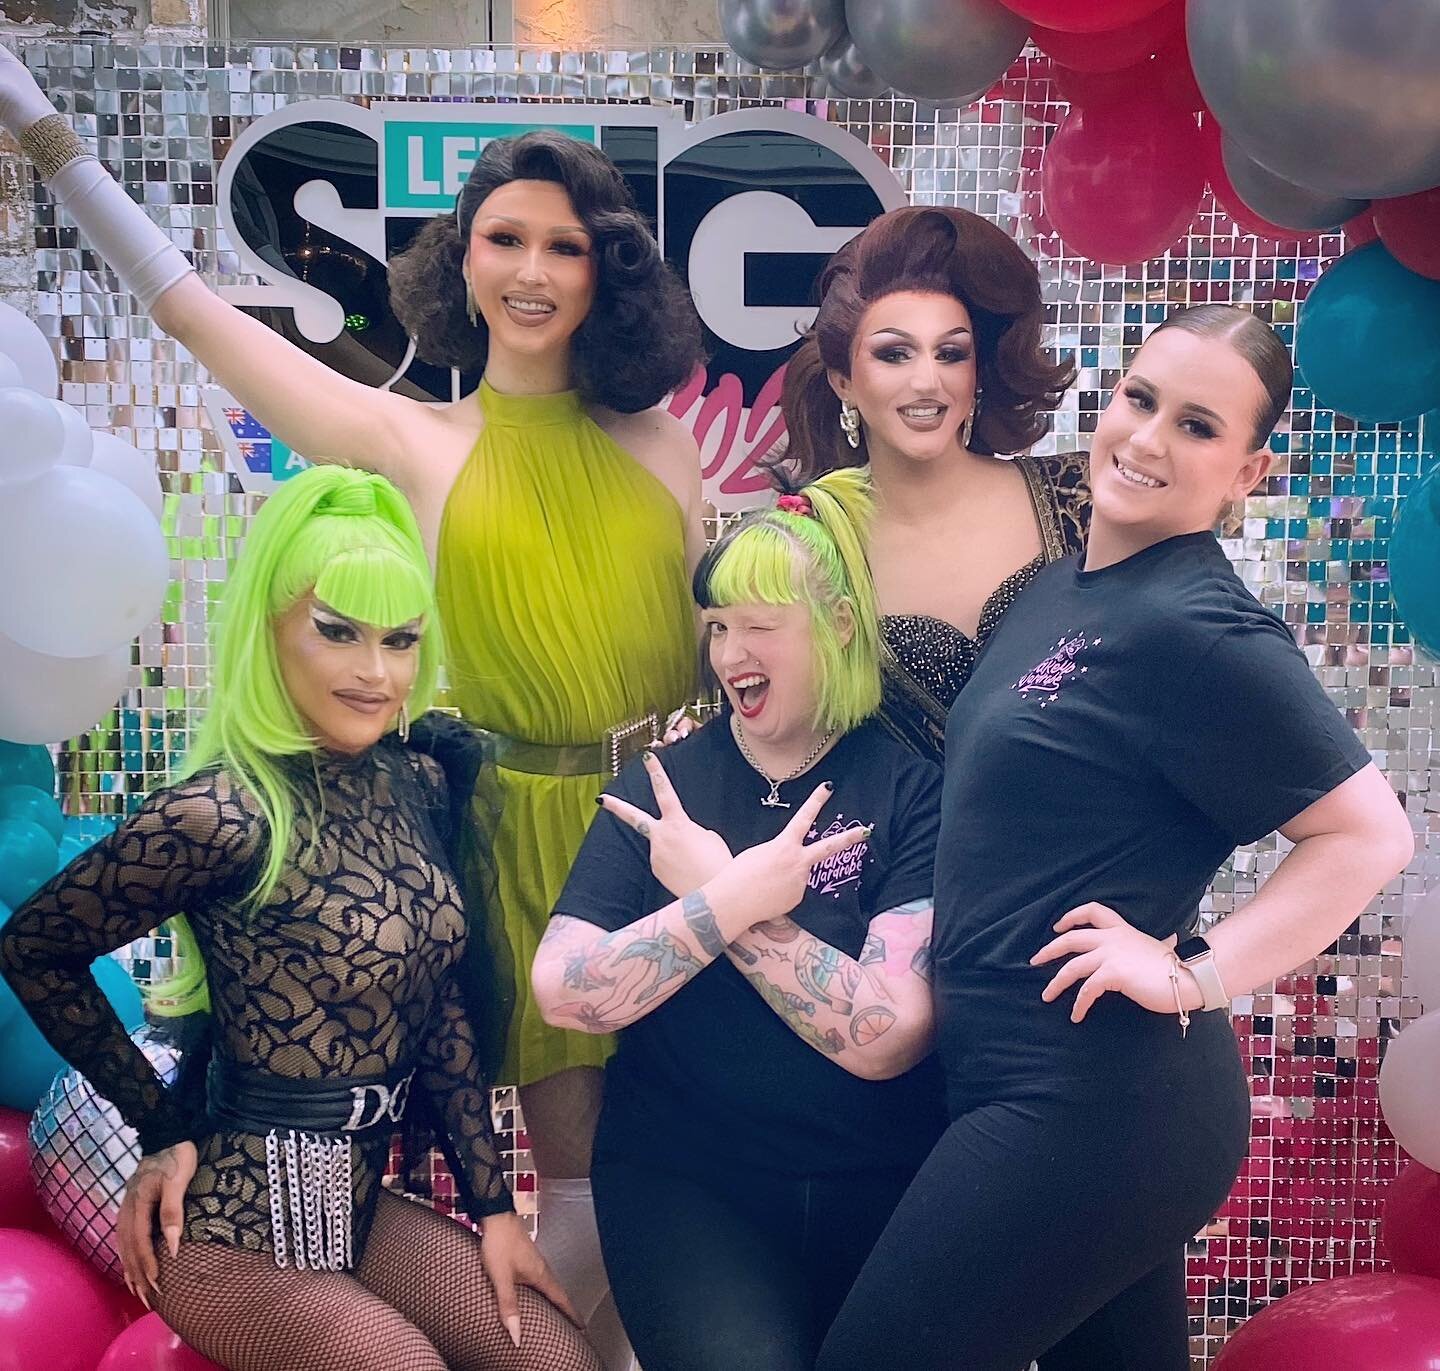 Thank you for having us @speakcommunications for the @letssinggame @plaion_anz launch 
💚🎤✨
On Sparkle Squad duties with @laurenherseyofficial , hosted by the talented Queen team 
@riotdq 
@mynxmoscato and @dollypocketdq 
At the @imperialerskinevill